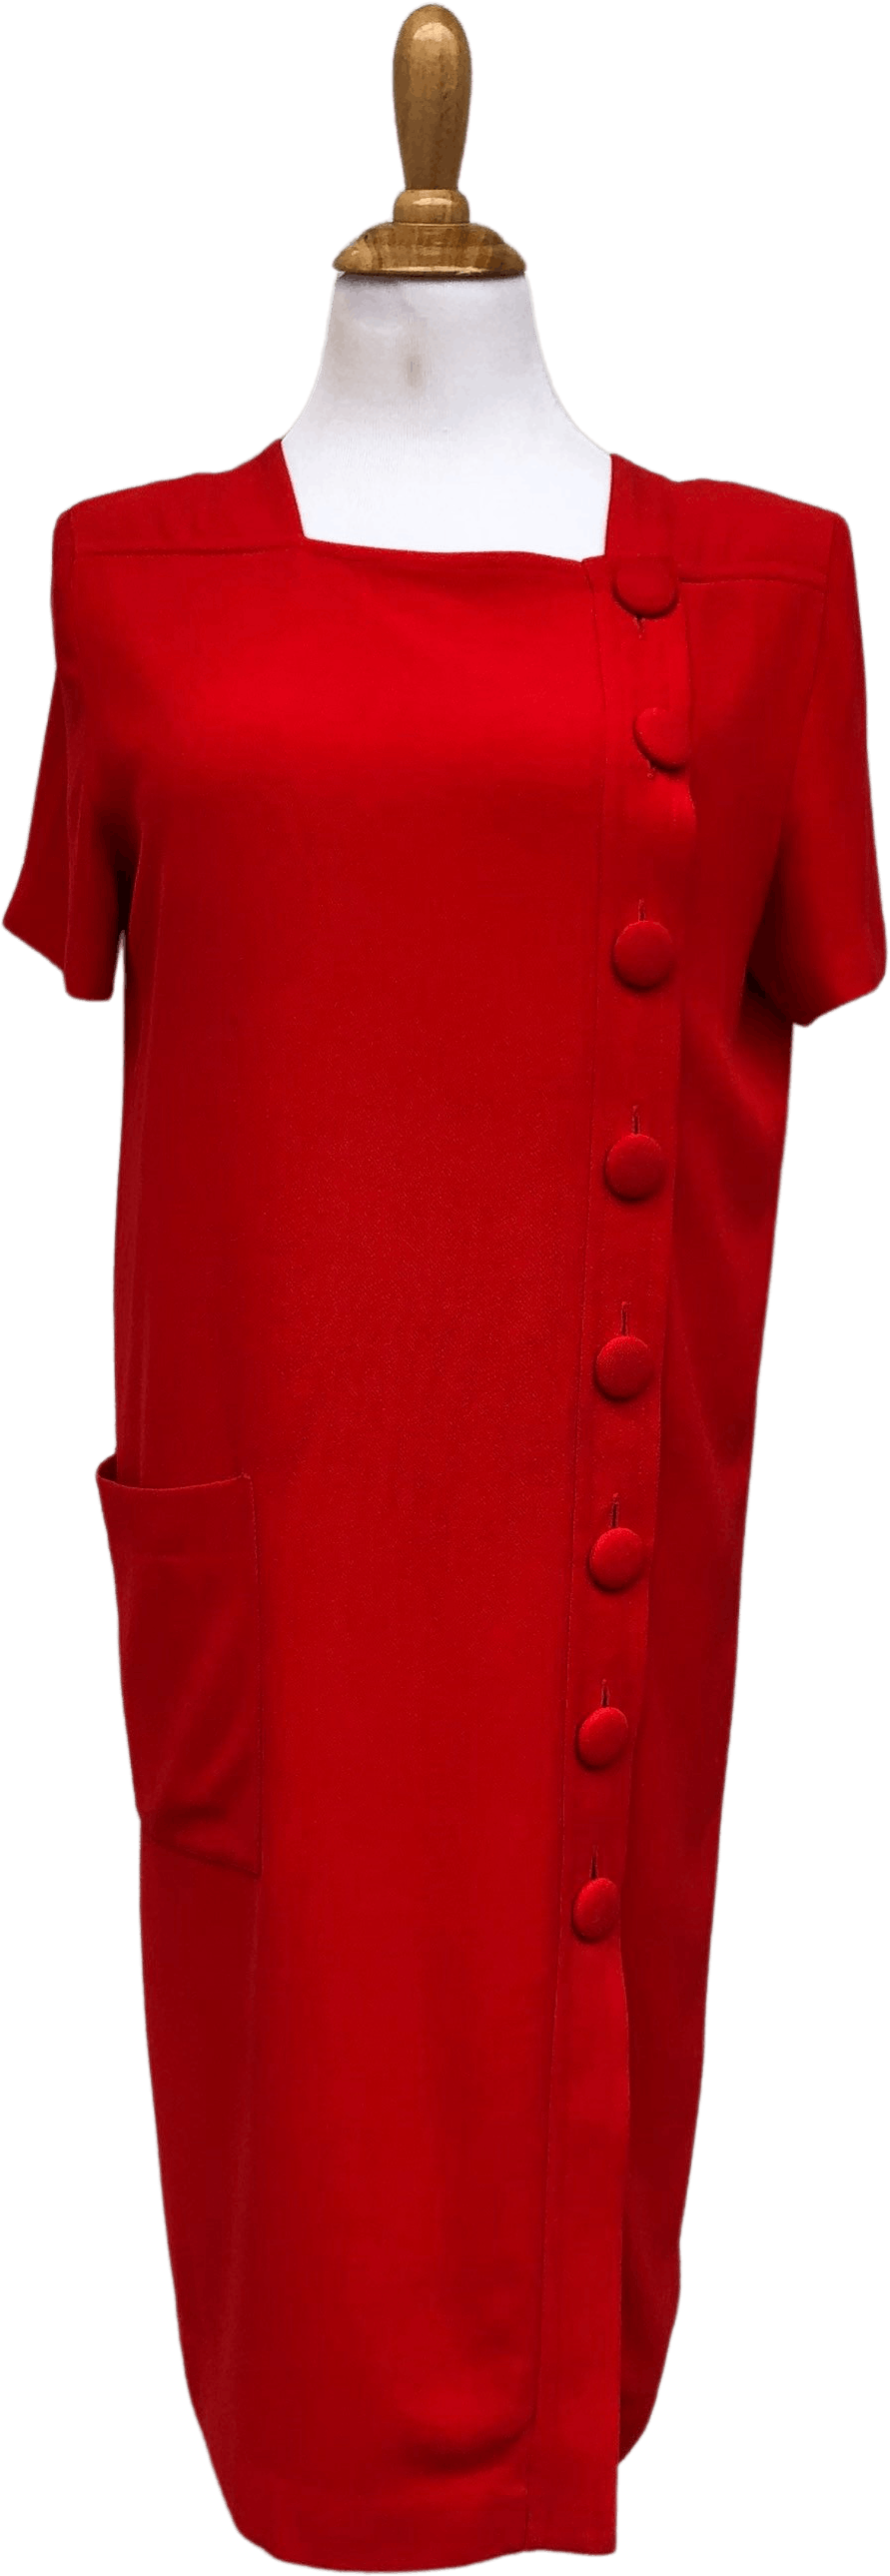 Vintage Red Dress with Asymmetric Buttons by Yves Saint Laurent | Shop ...